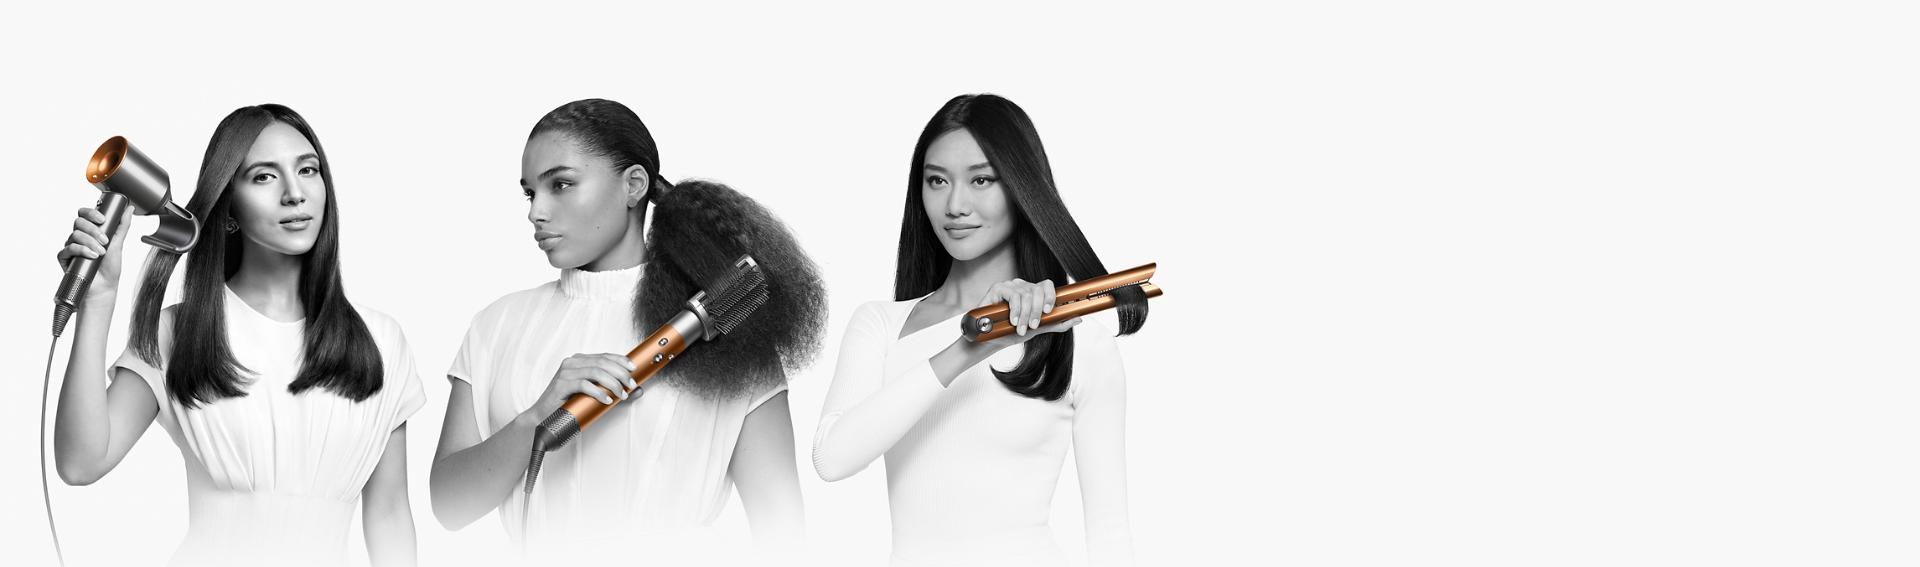 Models using the Dyson Airwrap, Supersonic and Corrale to styling hair